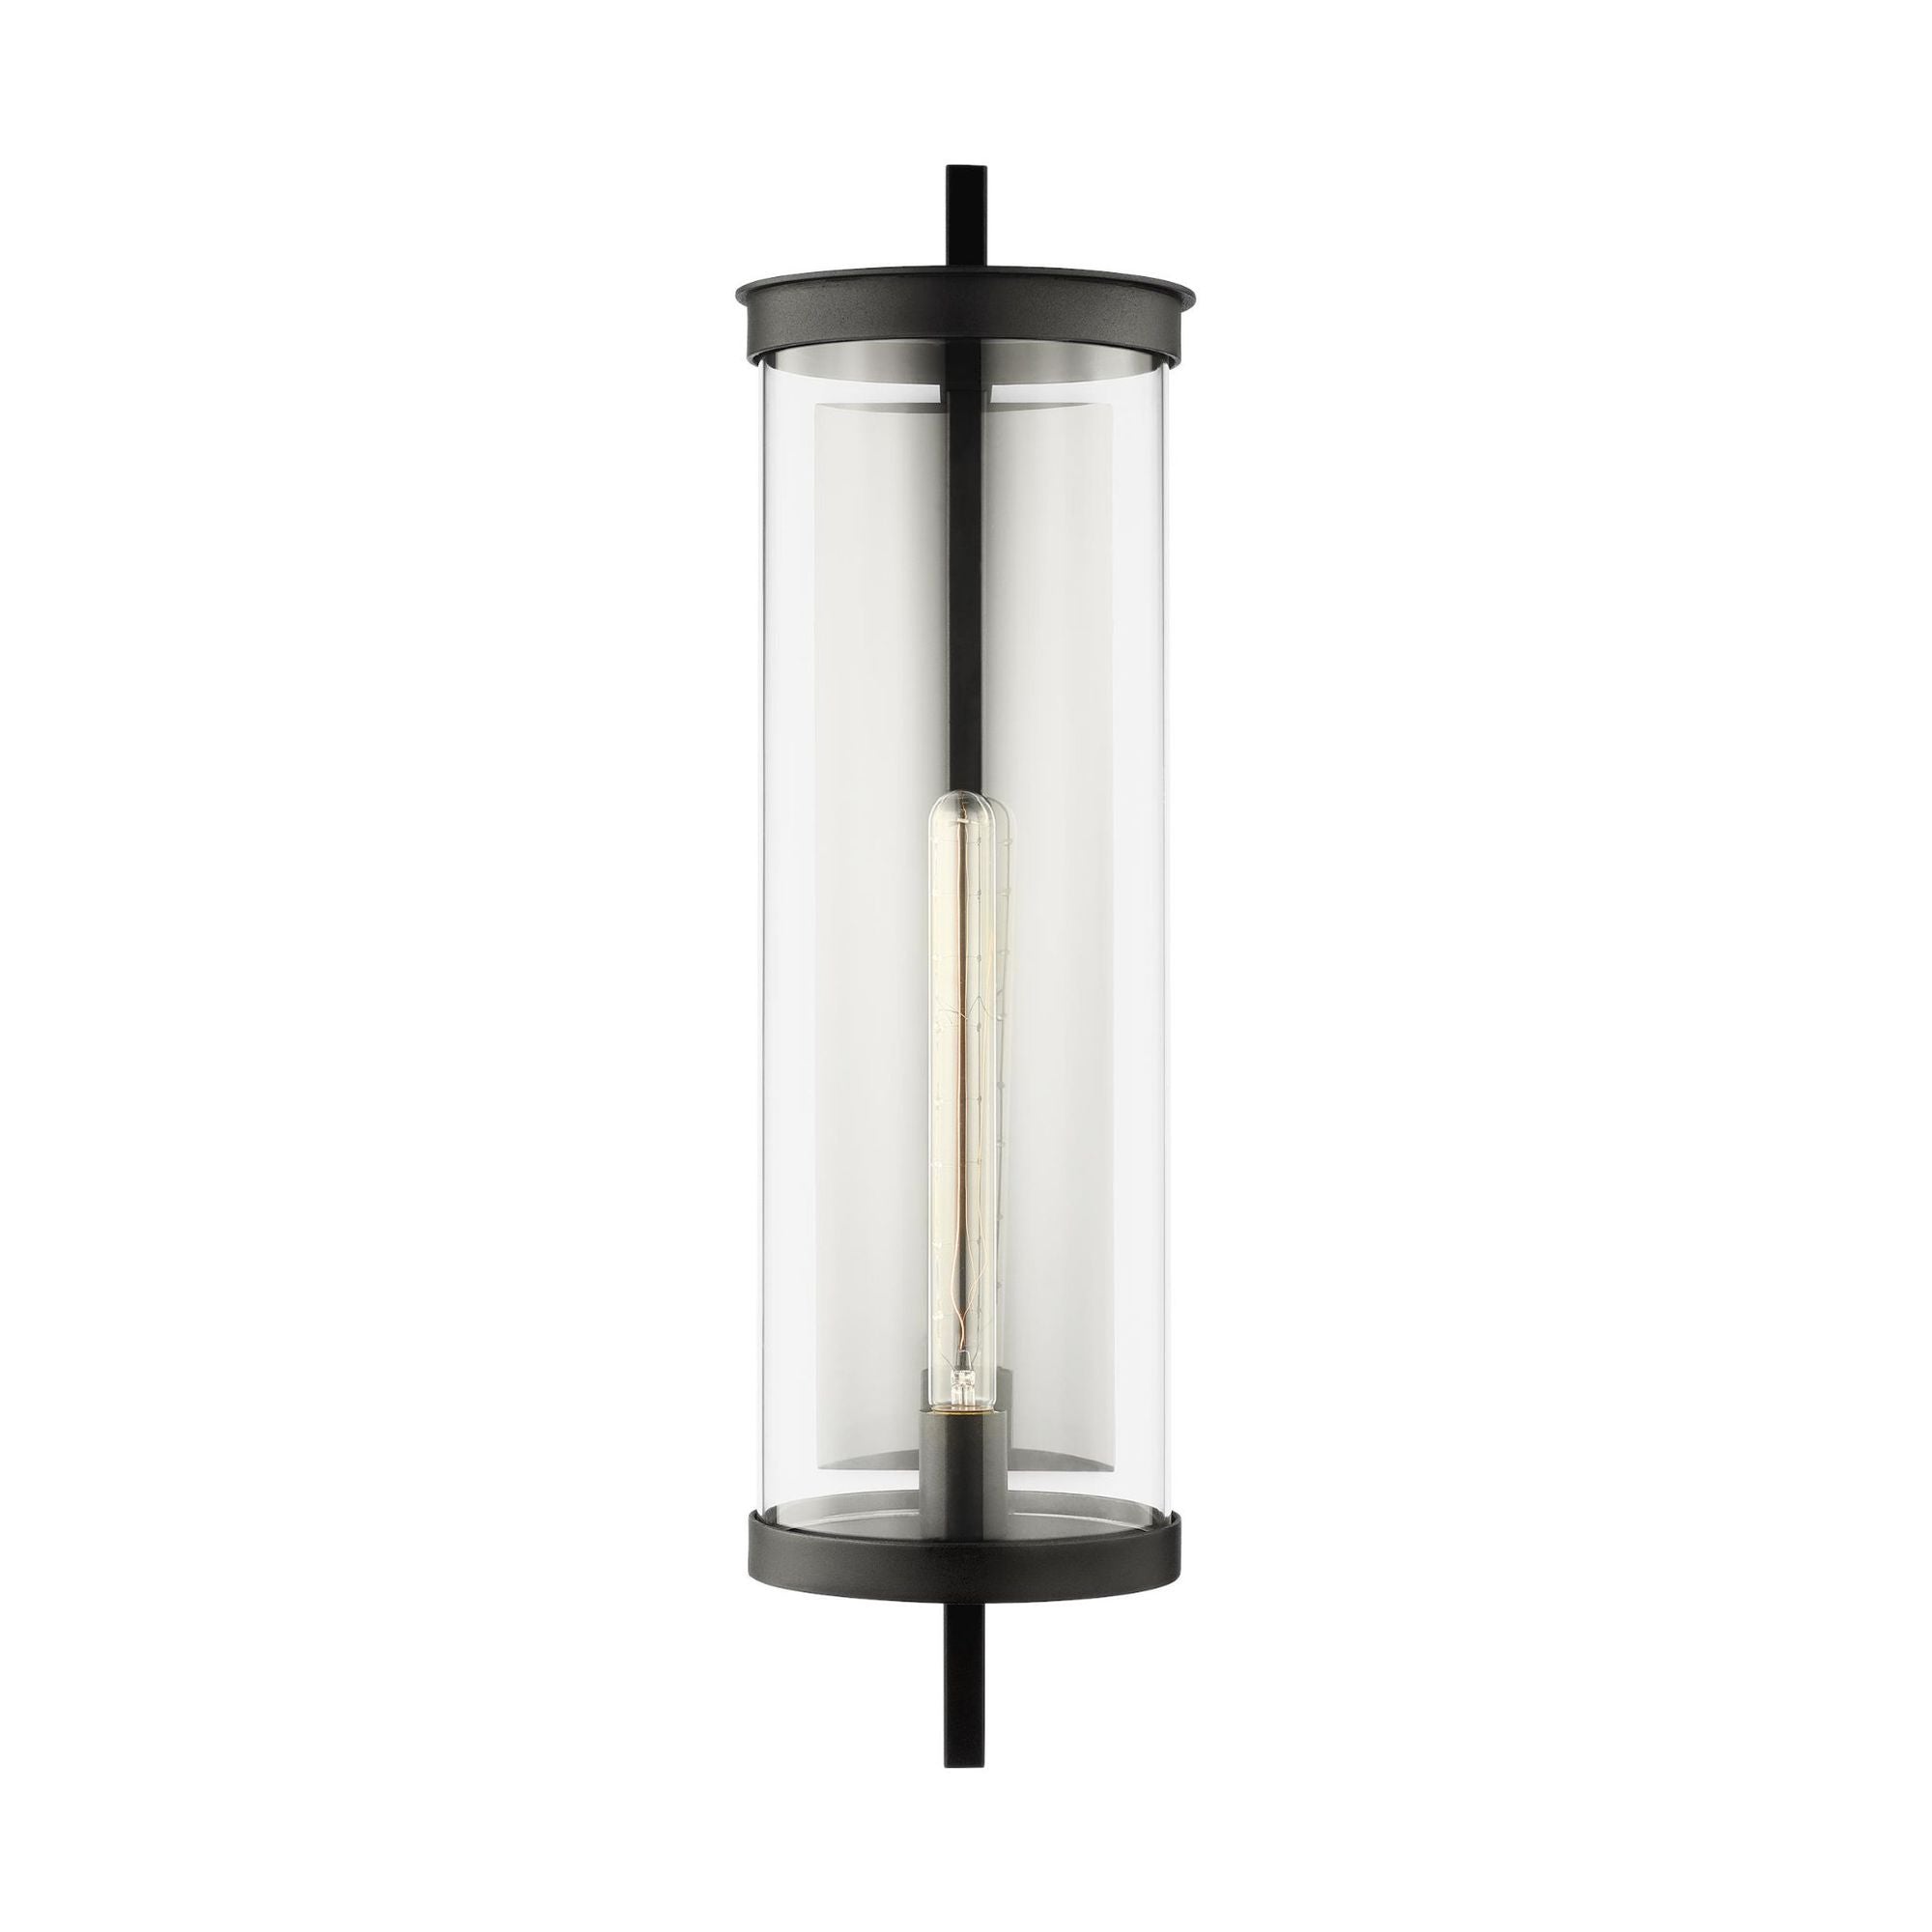 Chapman & Myers Eastham Extra Large Wall Lantern in Textured Black